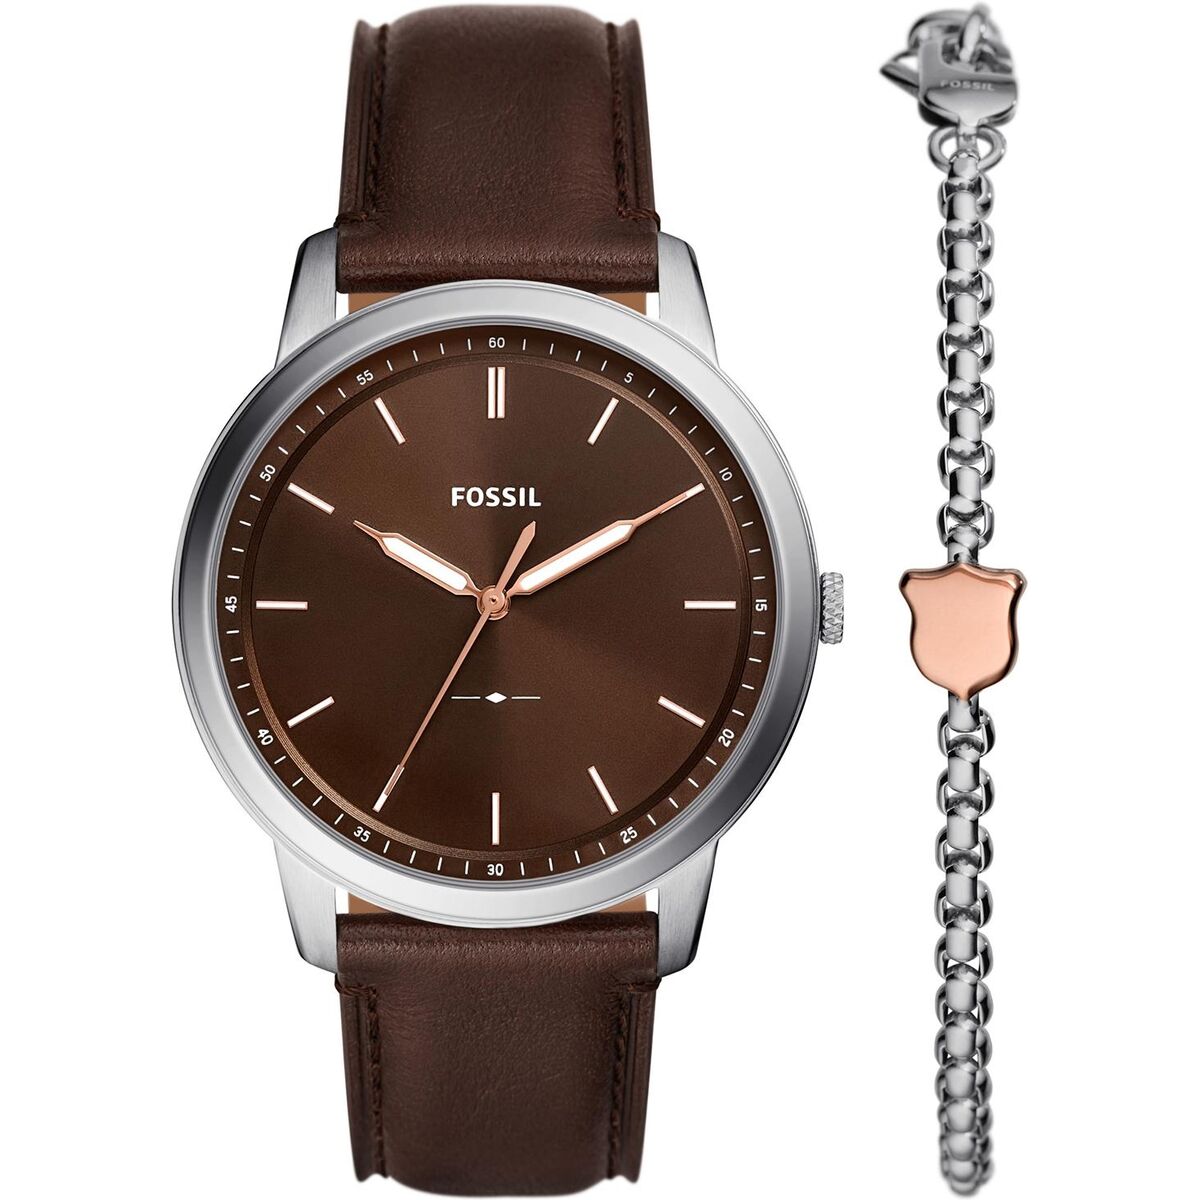 Montre Homme Fossil MINIMALIST SPECIAL PACK Marron (Ø 44 mm)